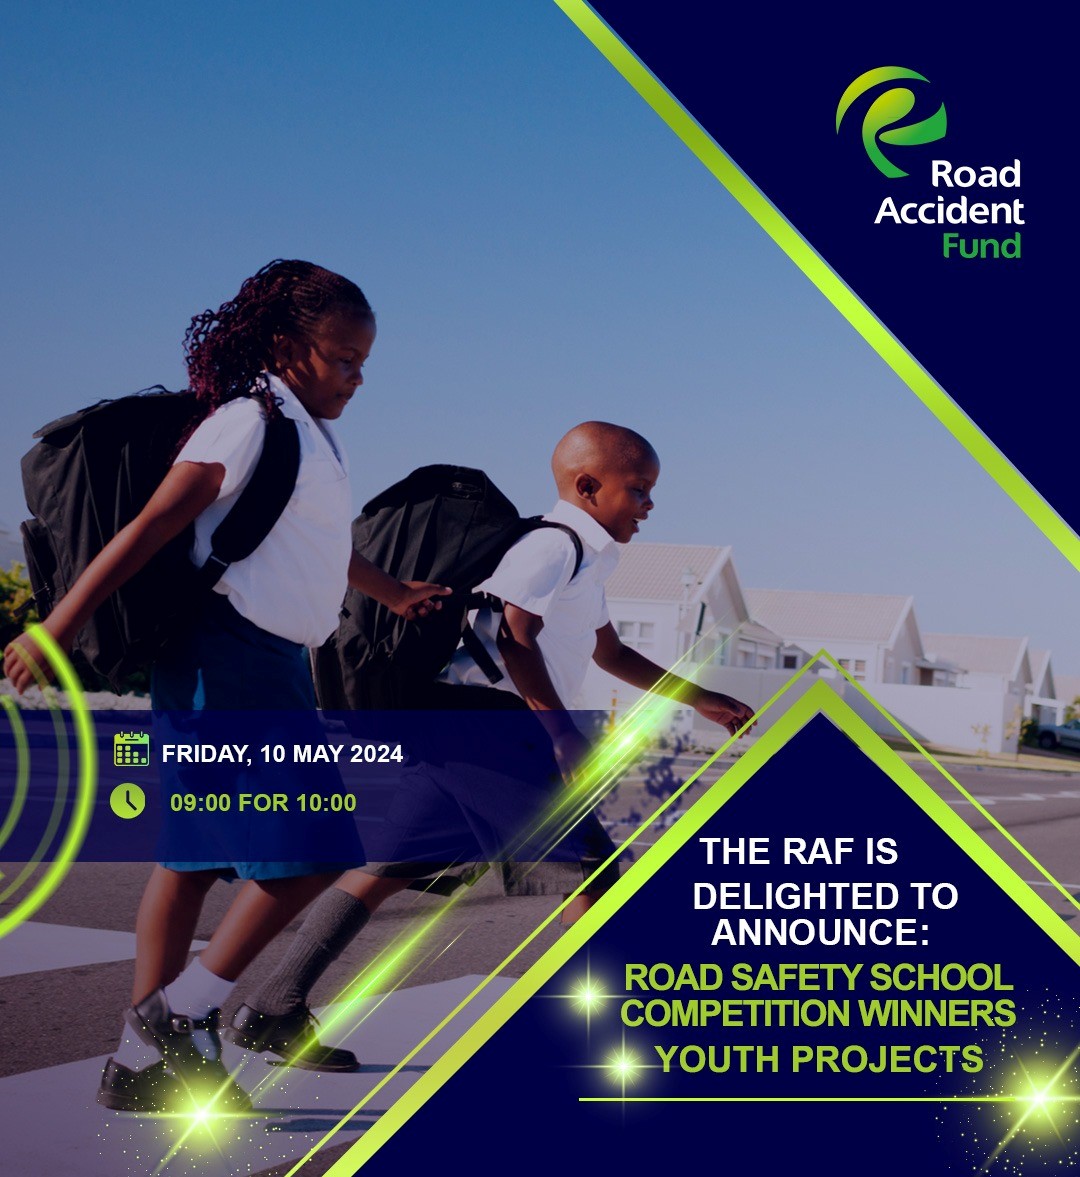 The Road Accident Fund is excited to announce the Road Safety School Competition winners & Youth Projects. The Deputy Minister of Transport, Mr Lisa Mangcu, board members & executives will join us as we announce the school competition winners supported by the fund. #Icare²